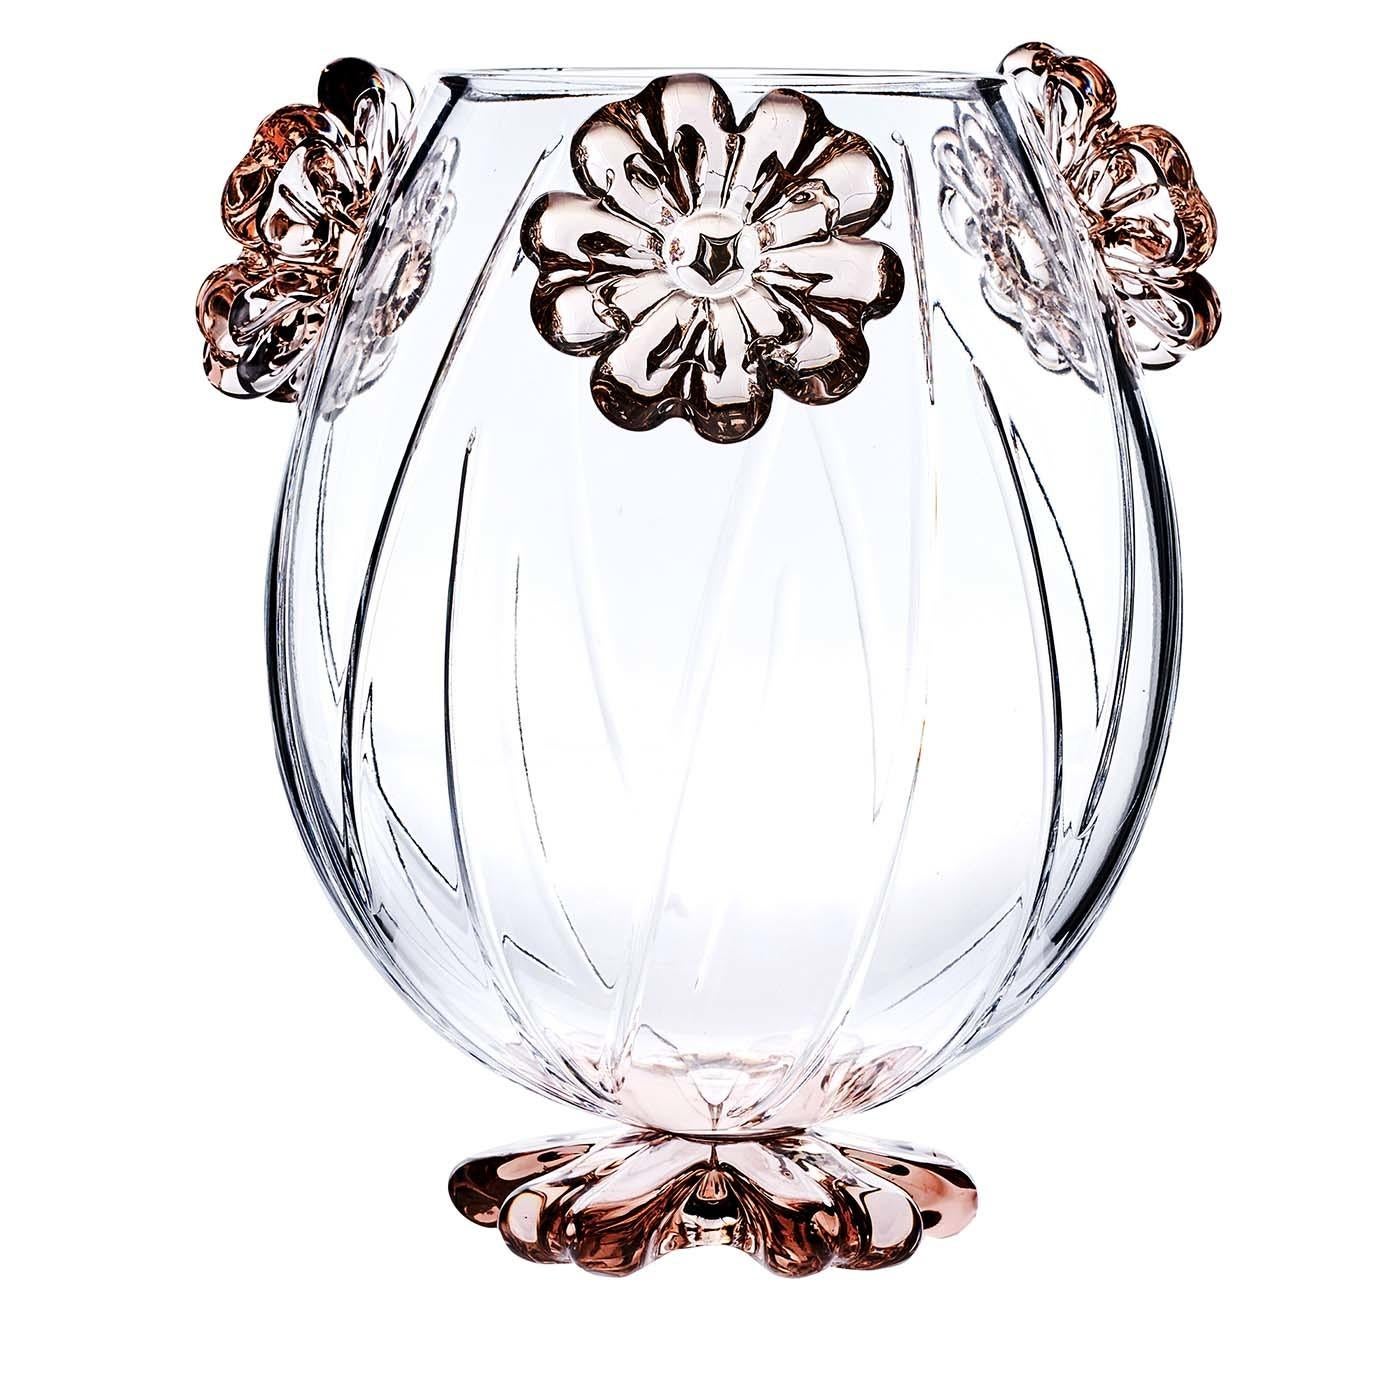 A delicate design entirely crafted by hand using pure crystal with over 24% of PbO is the distinctive feature of this elegant round vase that will imbue with charm and sophistication a classic or modern interior. The gentle curves of the transparent